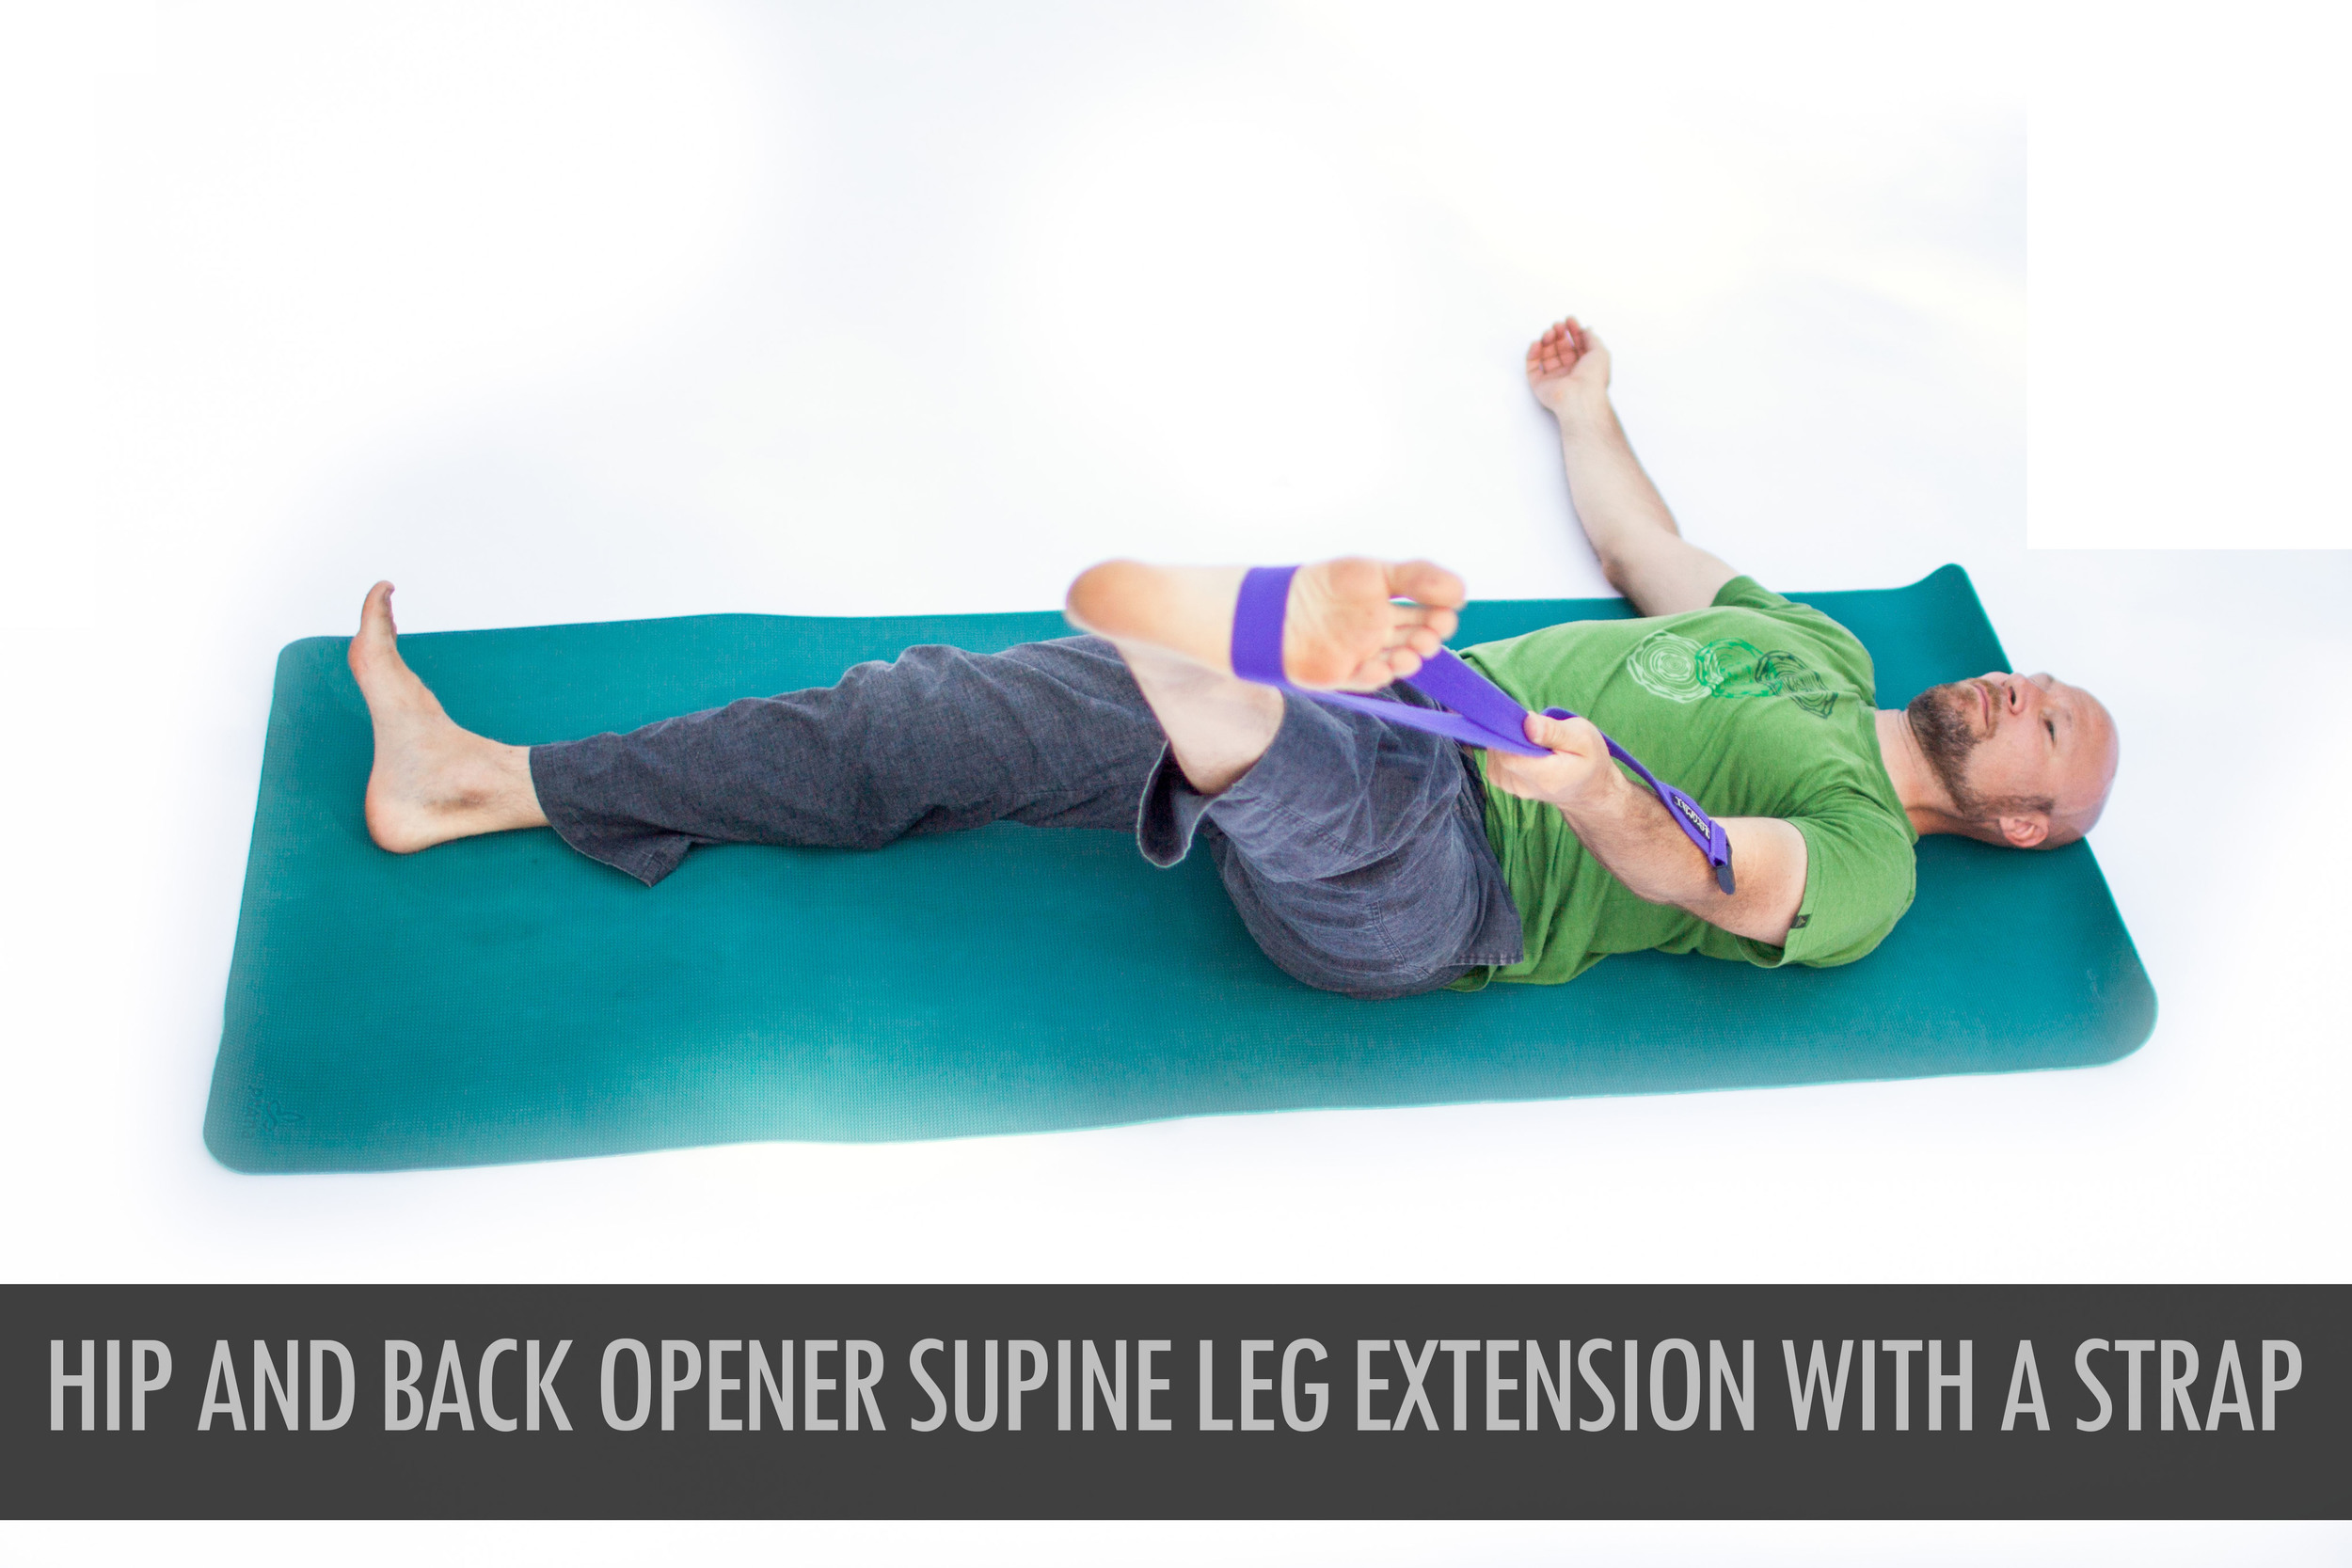 Hip Circle Supine Leg Extension With A Strap 2.jpg